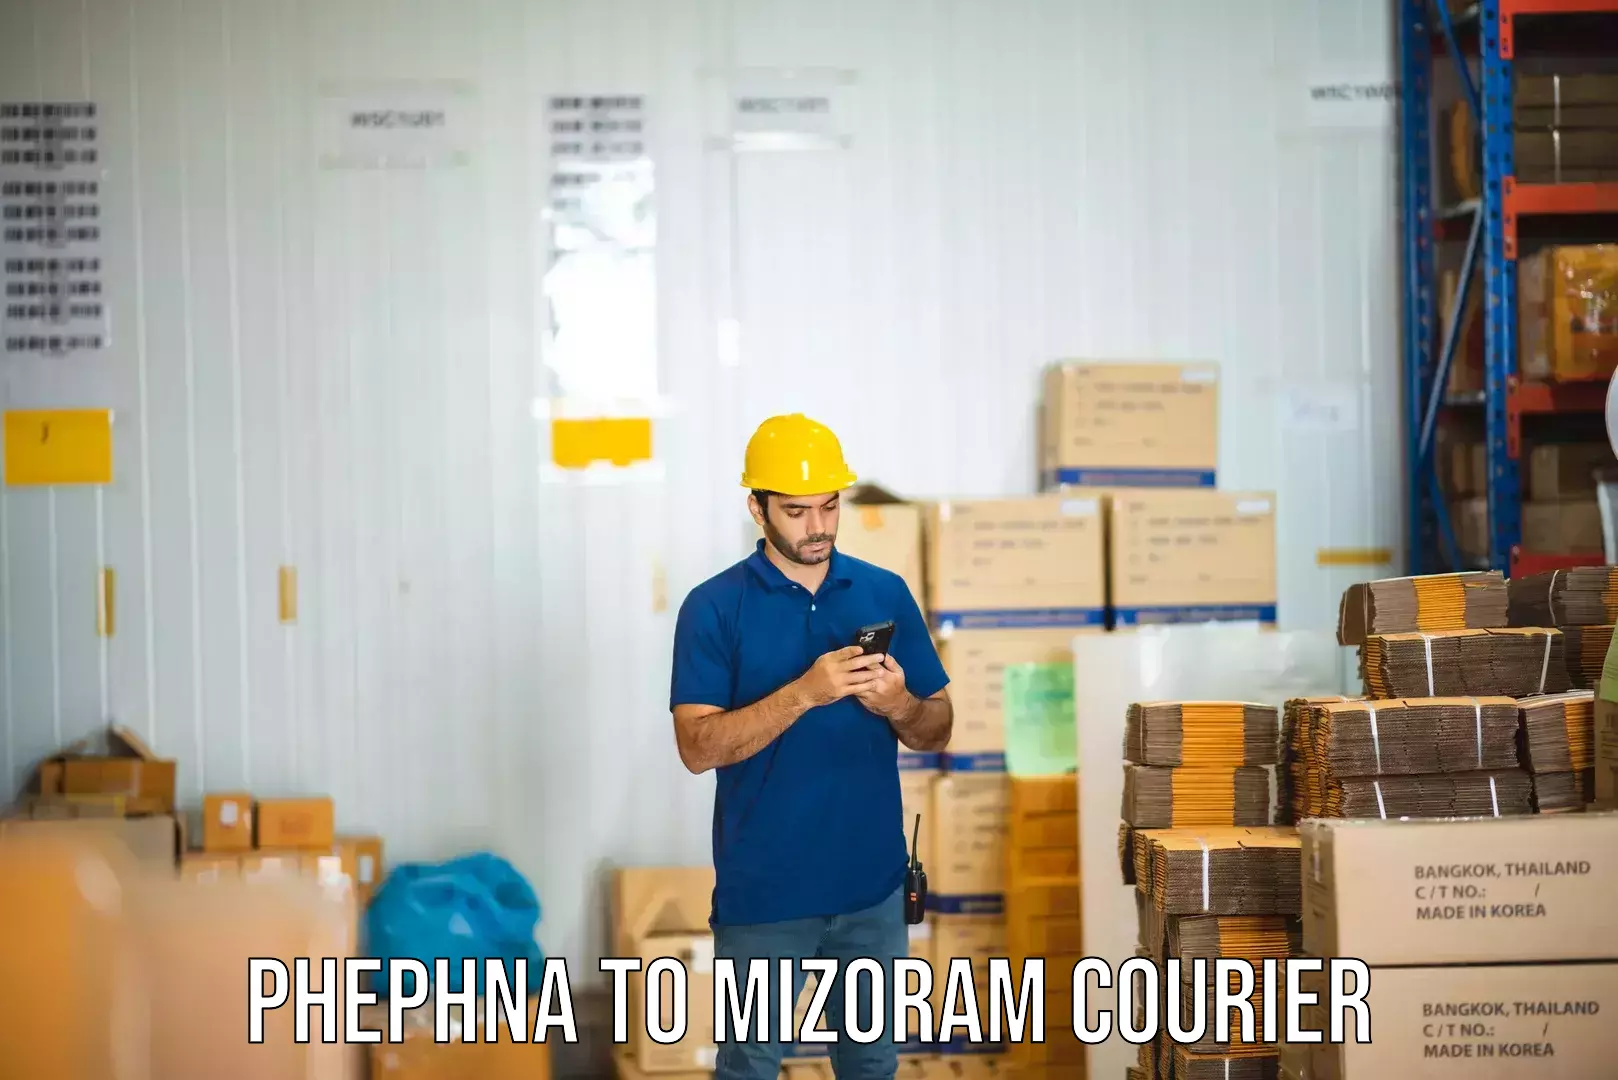 Flexible delivery schedules Phephna to Aizawl